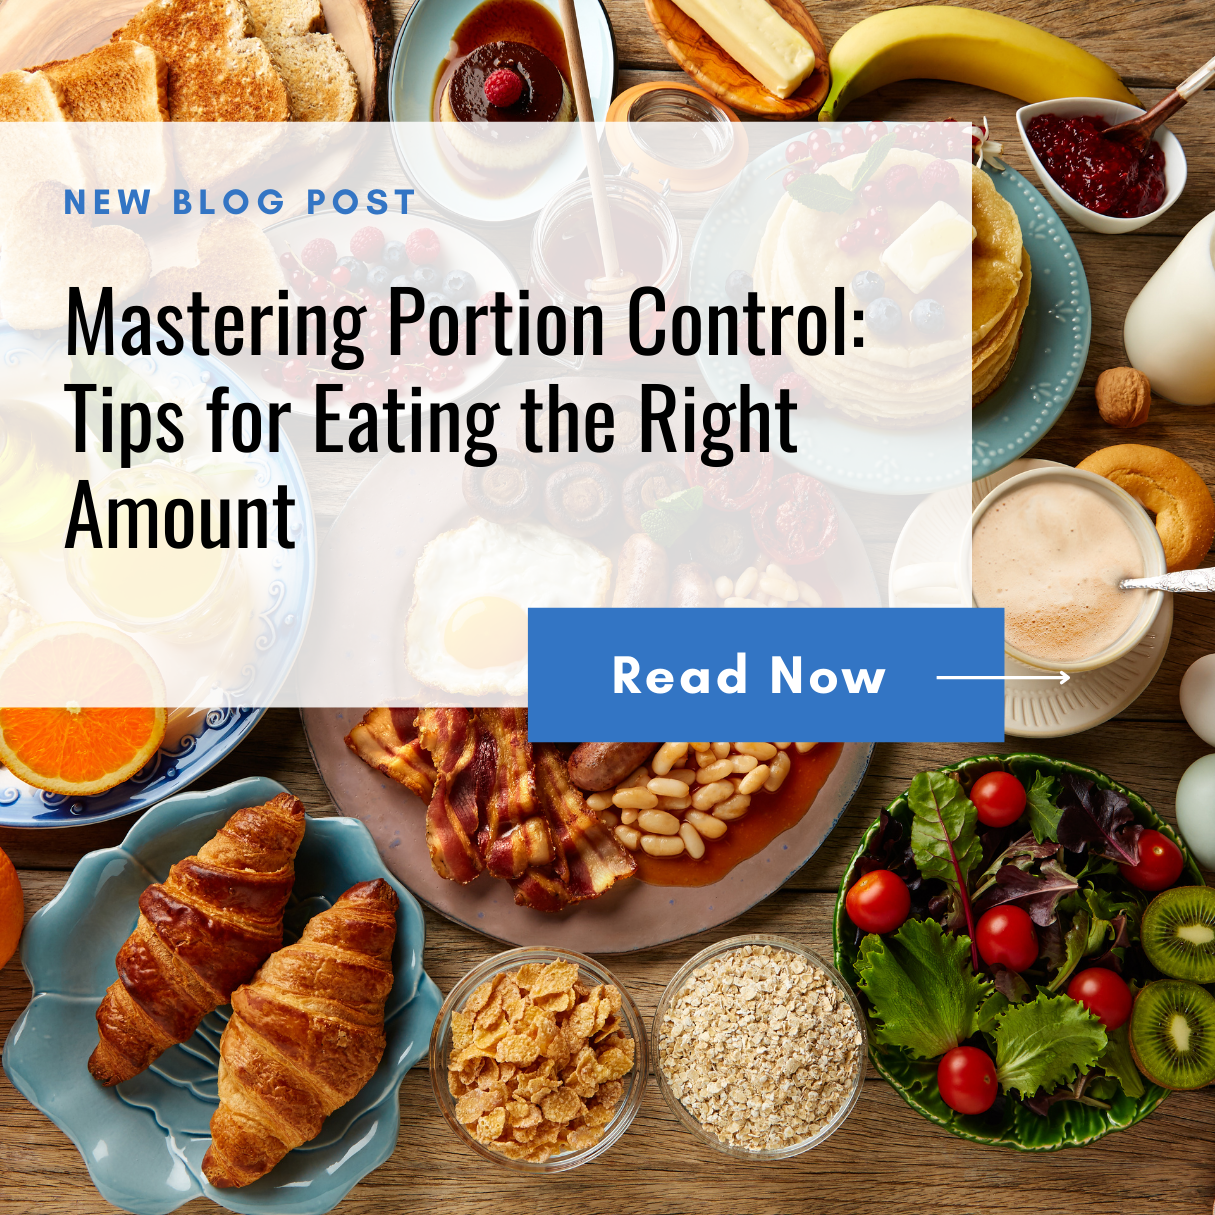 Mastering Portion Control: Tips for Eating the Right Amount